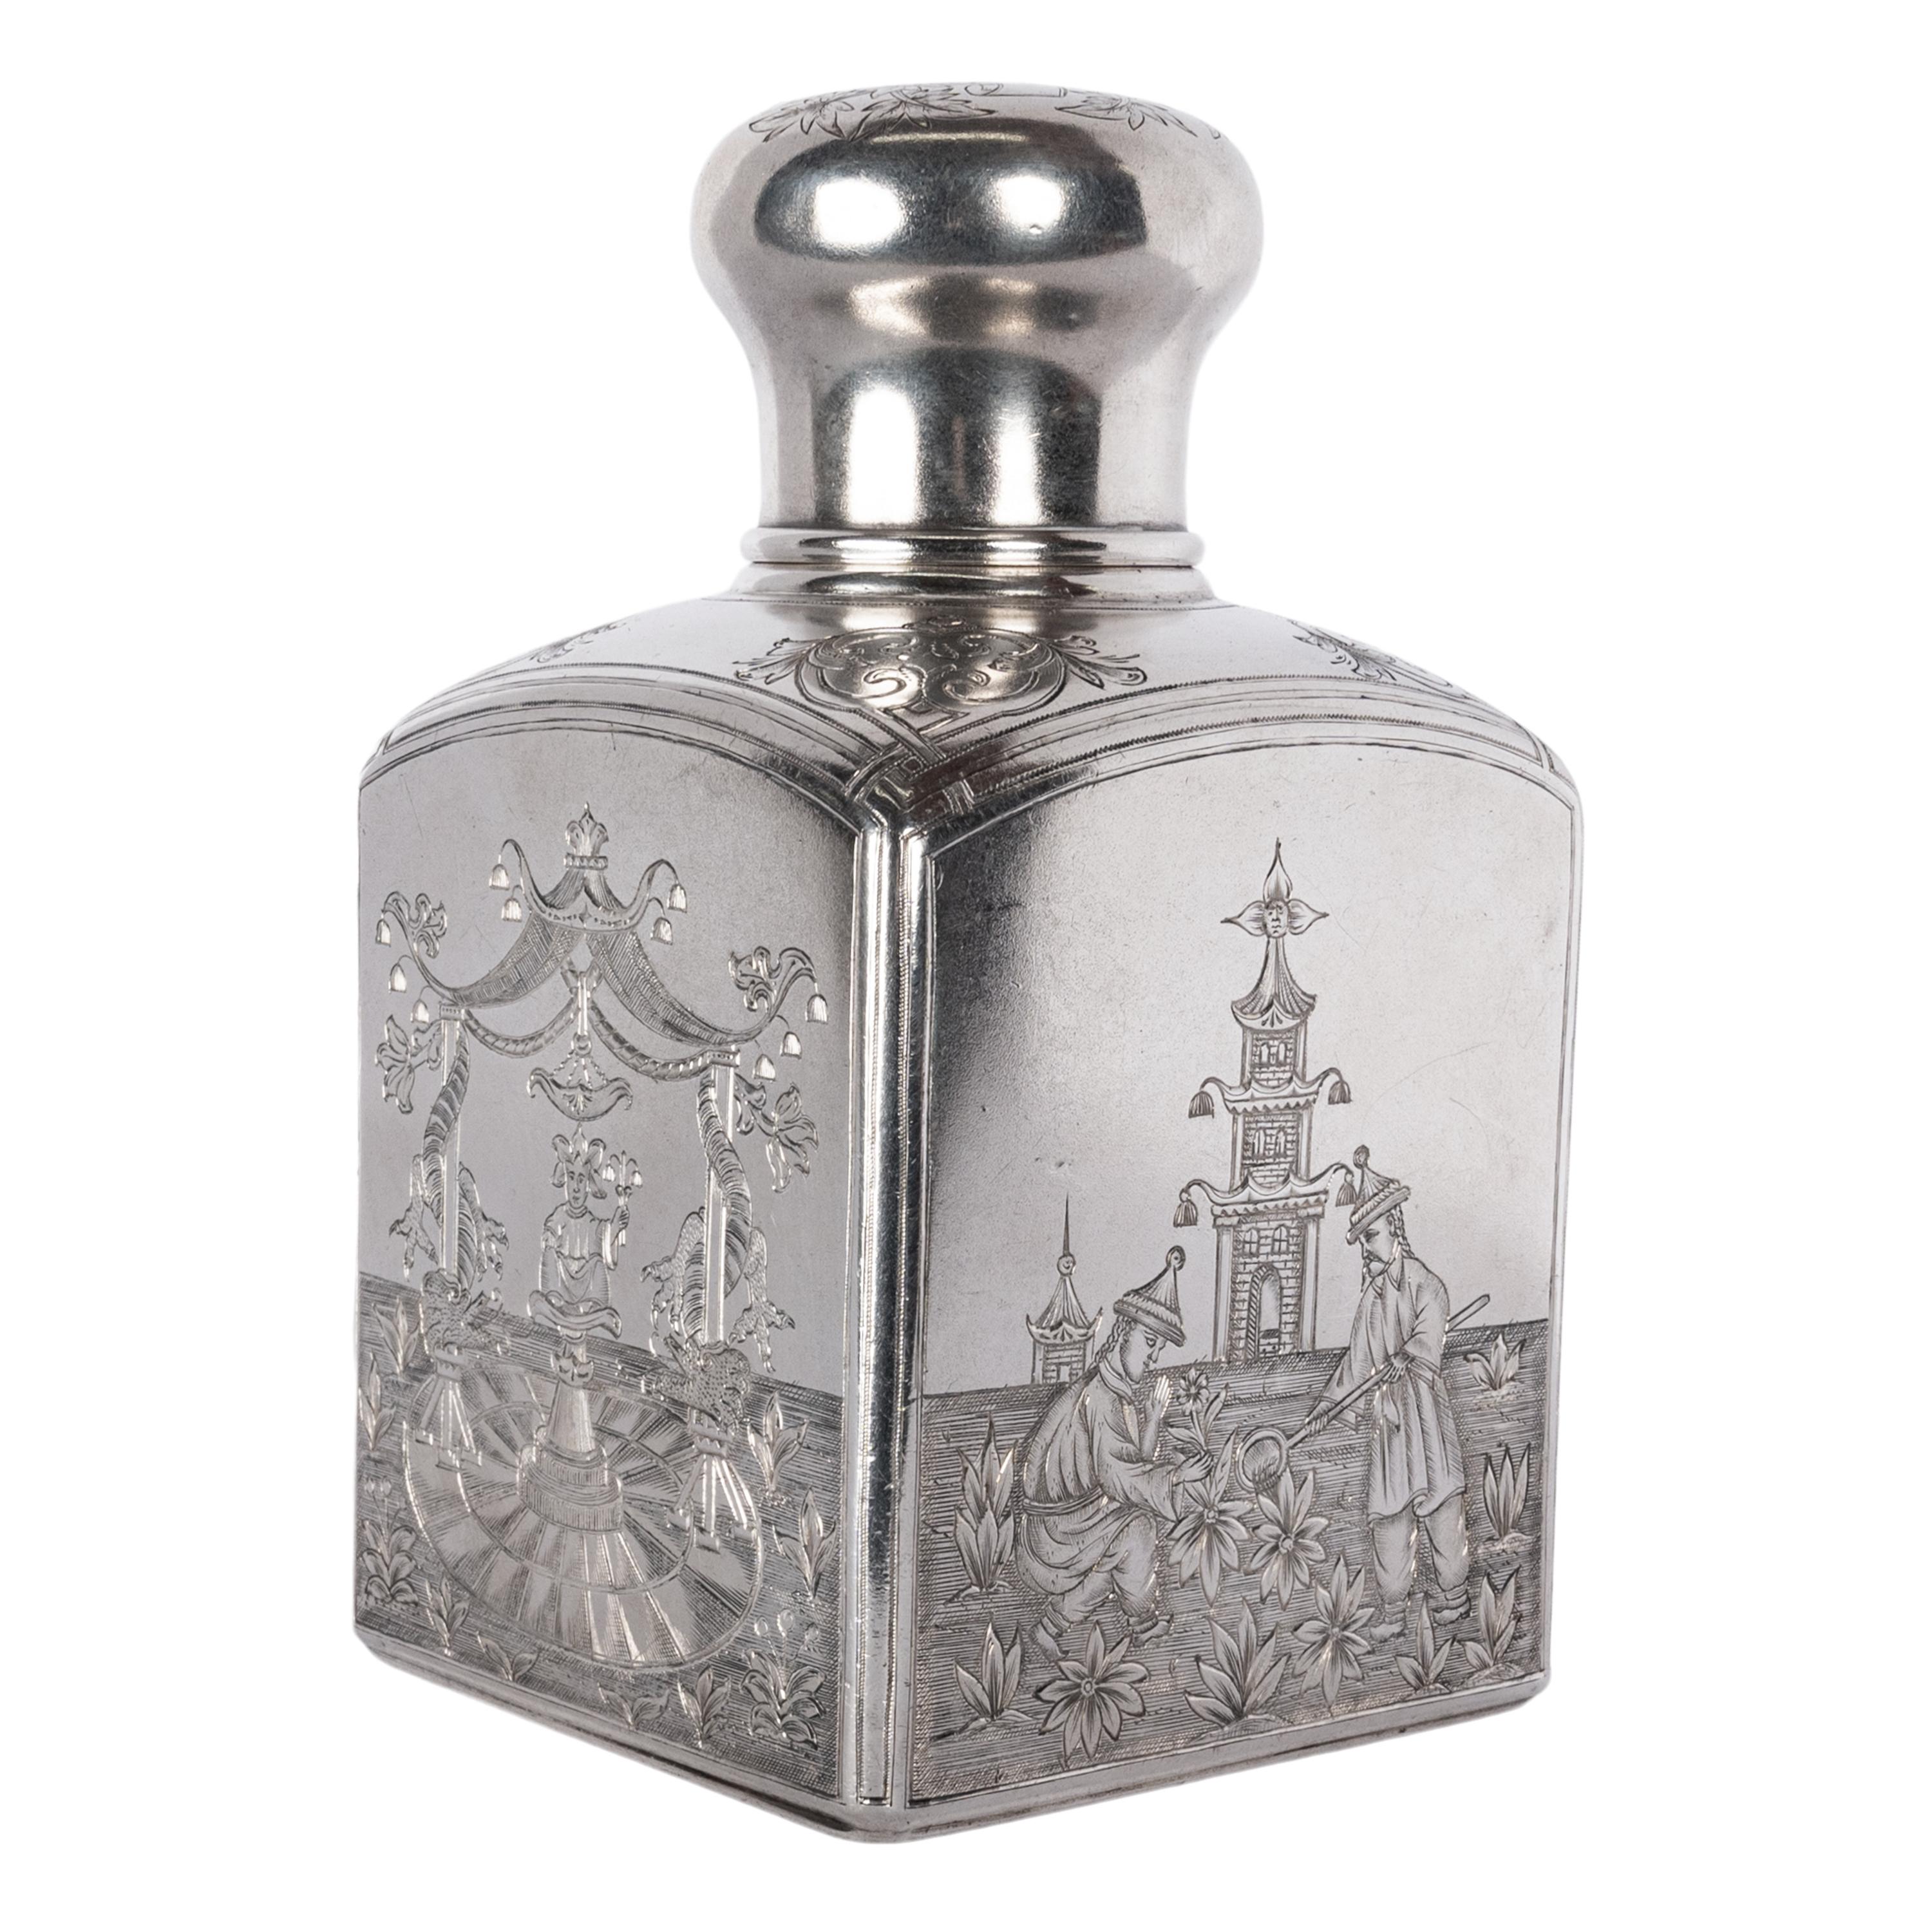 A fine quality antique Russian Imperial silver tea caddy, engraved in the Chinoiserie style, by Gustav Klingert, Moscow, dated 1894.
Gustav Klingert worked as a master for Karl Faberge before opening his own Moscow factory/workshop in 1865. He